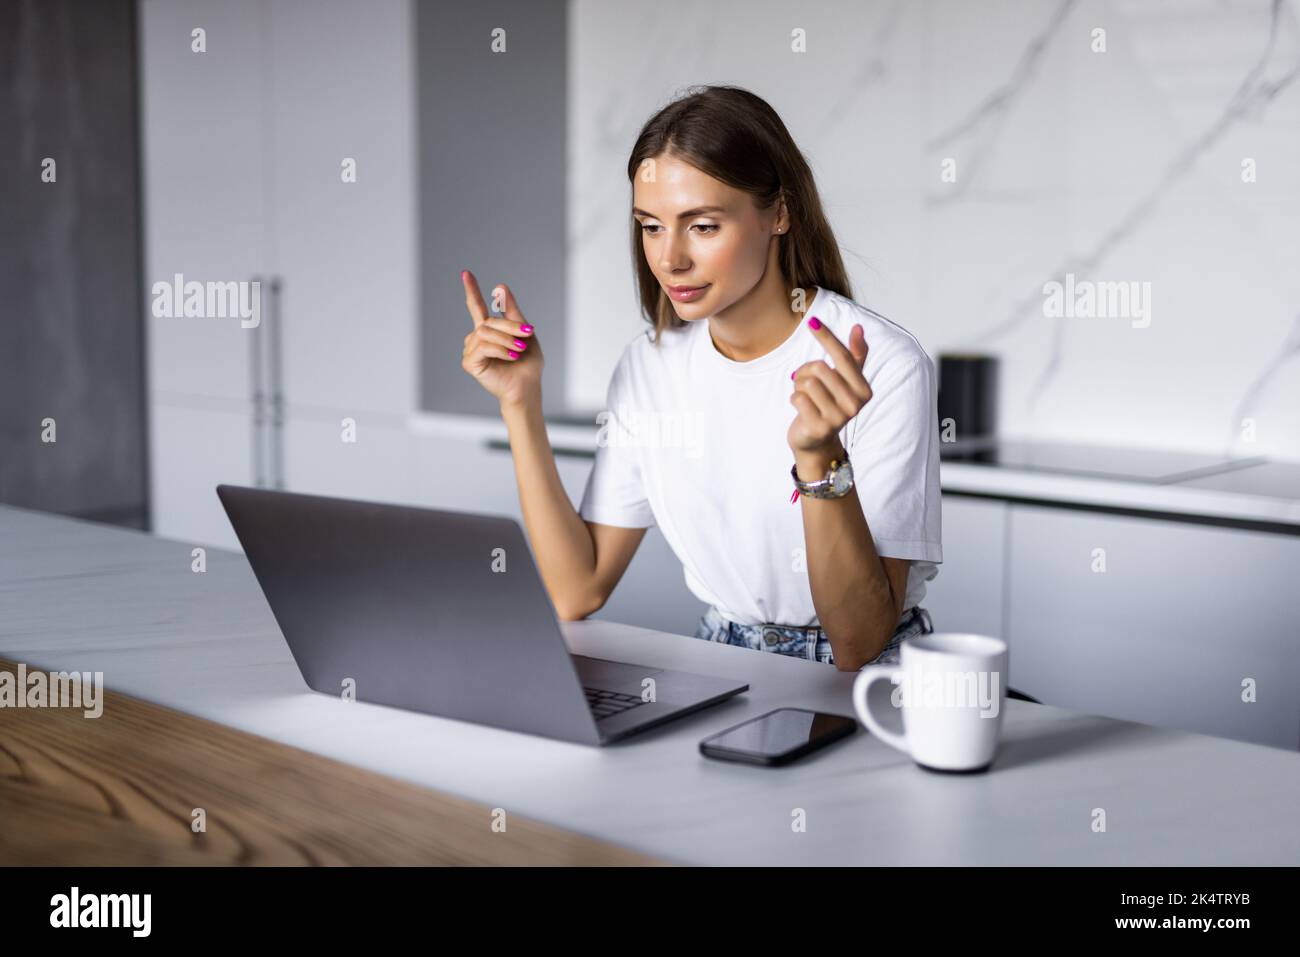 Young woman talking on video call and waving hand while sitting at table inthe kitchen. Stock Photo